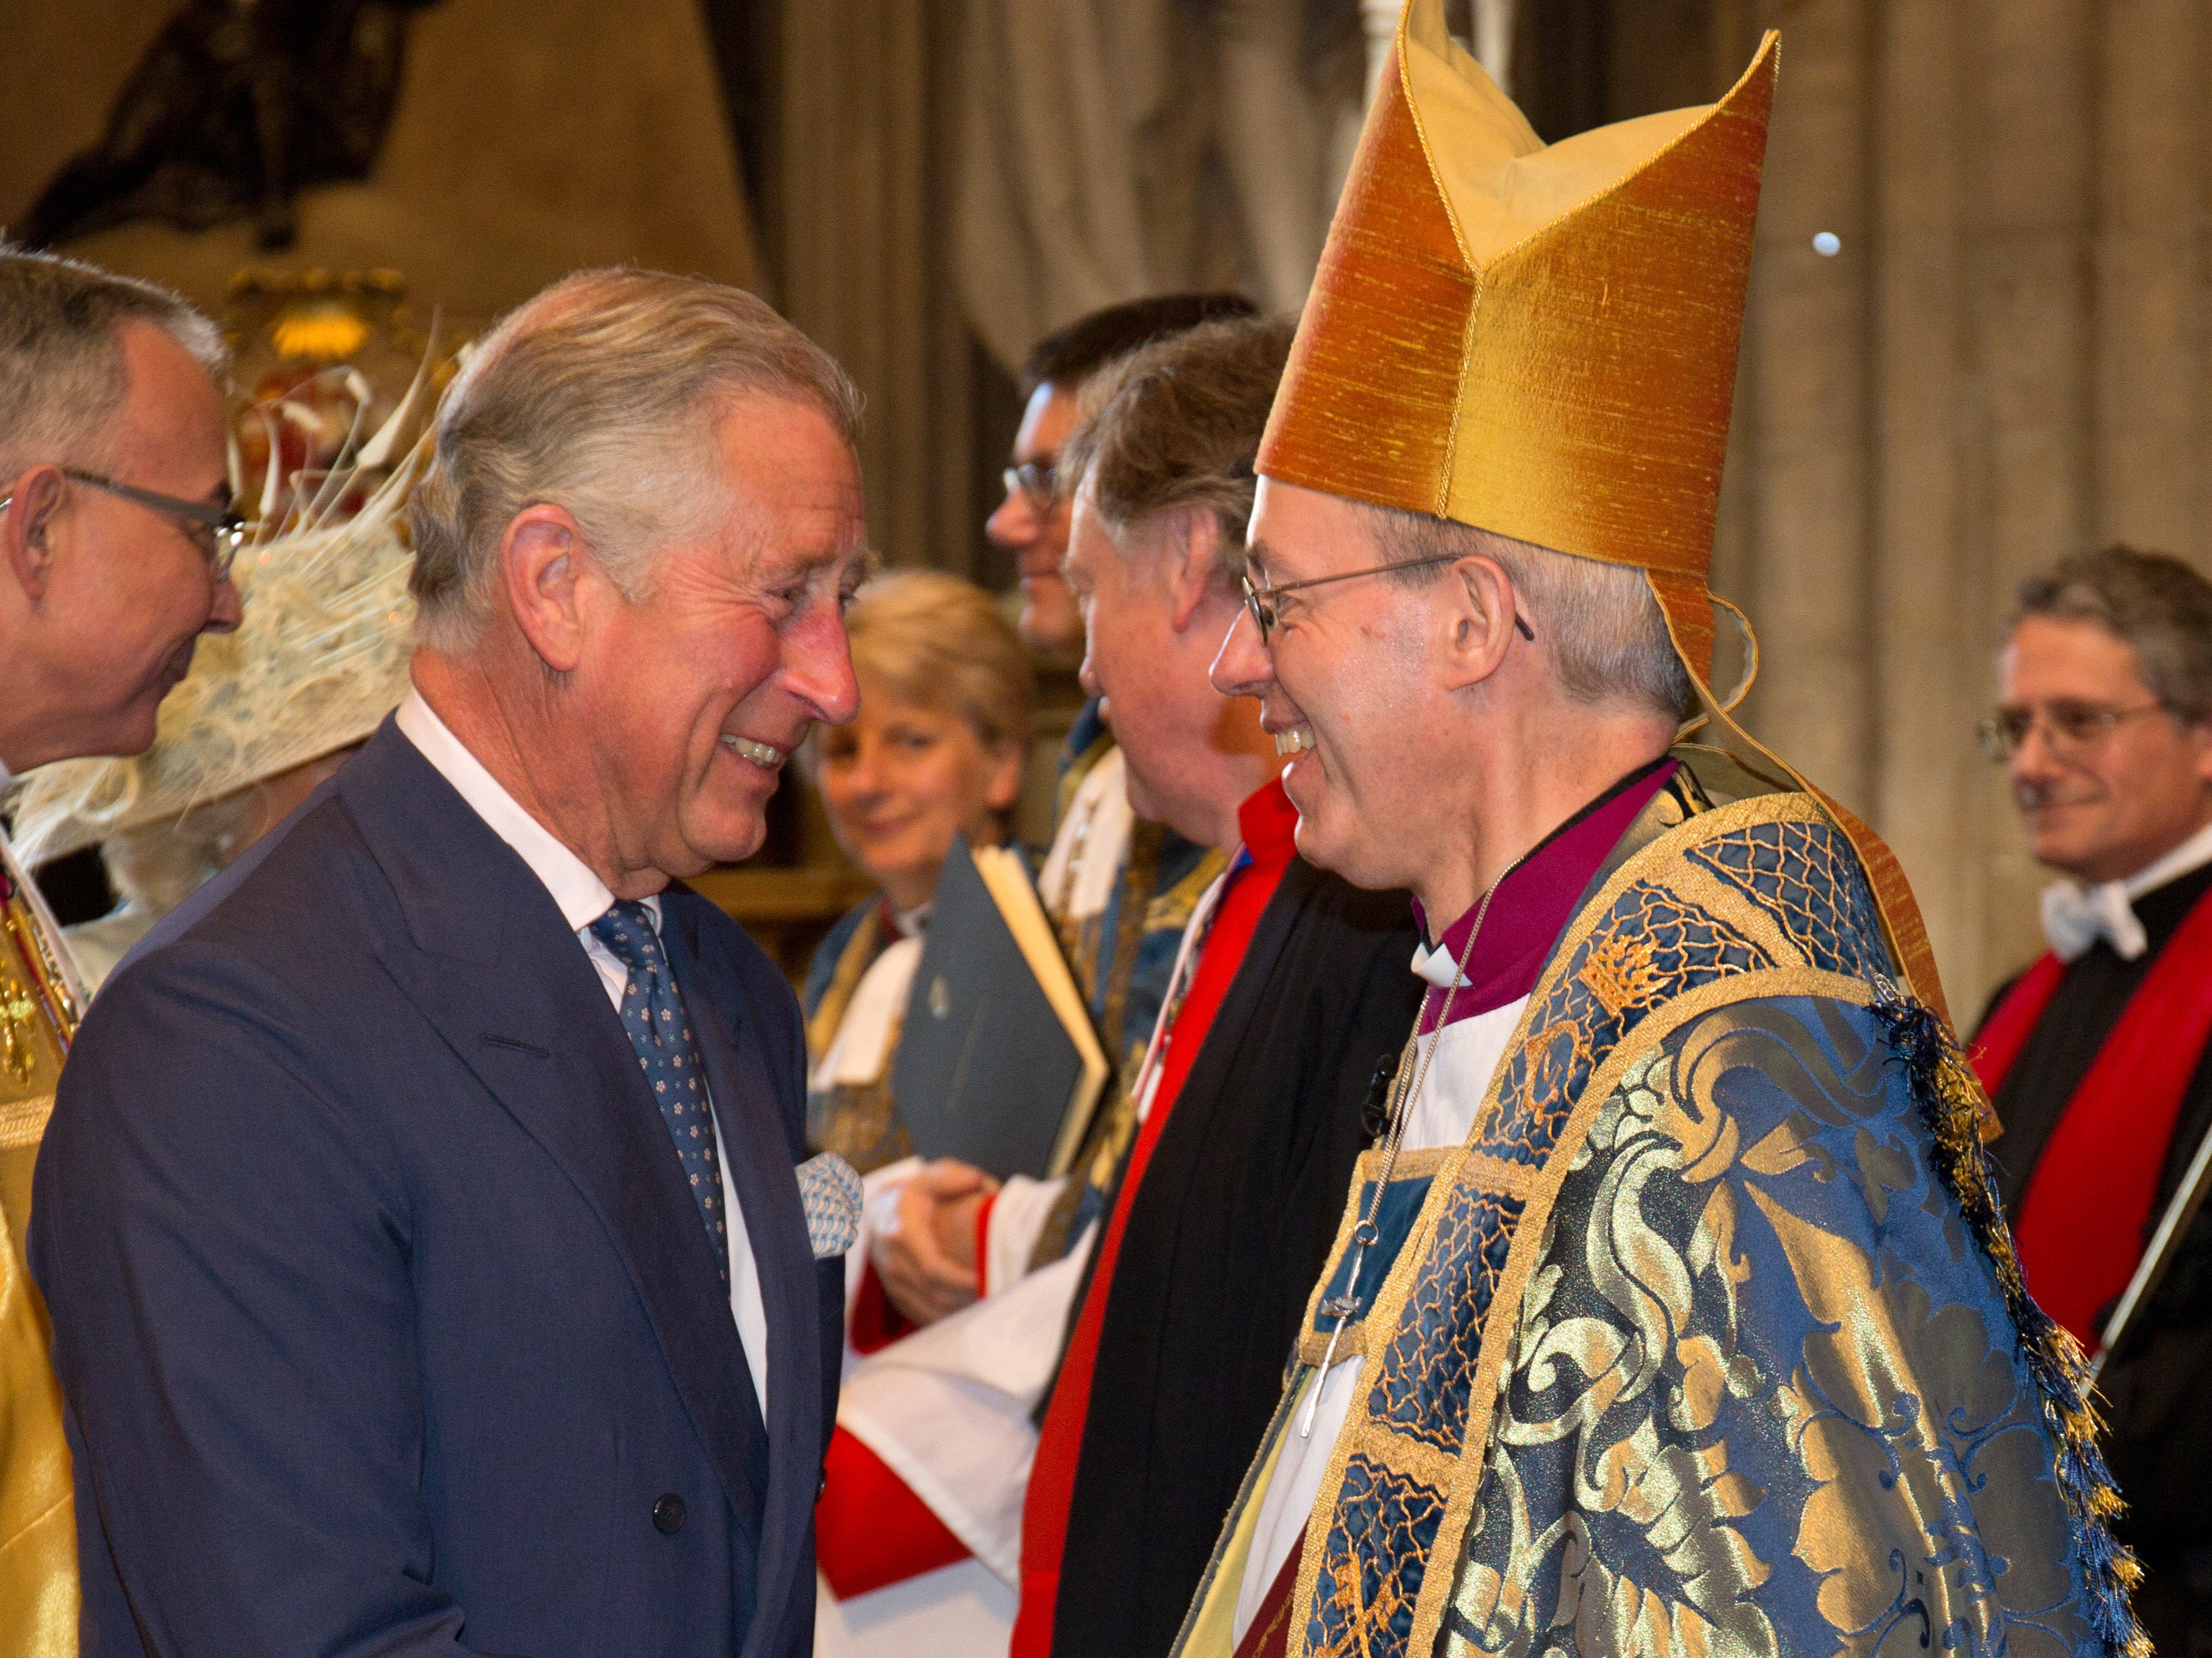 King Charles, previously the Prince of Wales, greets the Archbishop of Canterbury Justin Welby in 2013. The monarch will be anointed by the Archbishop during the coronation ceremony on 6 May 2023